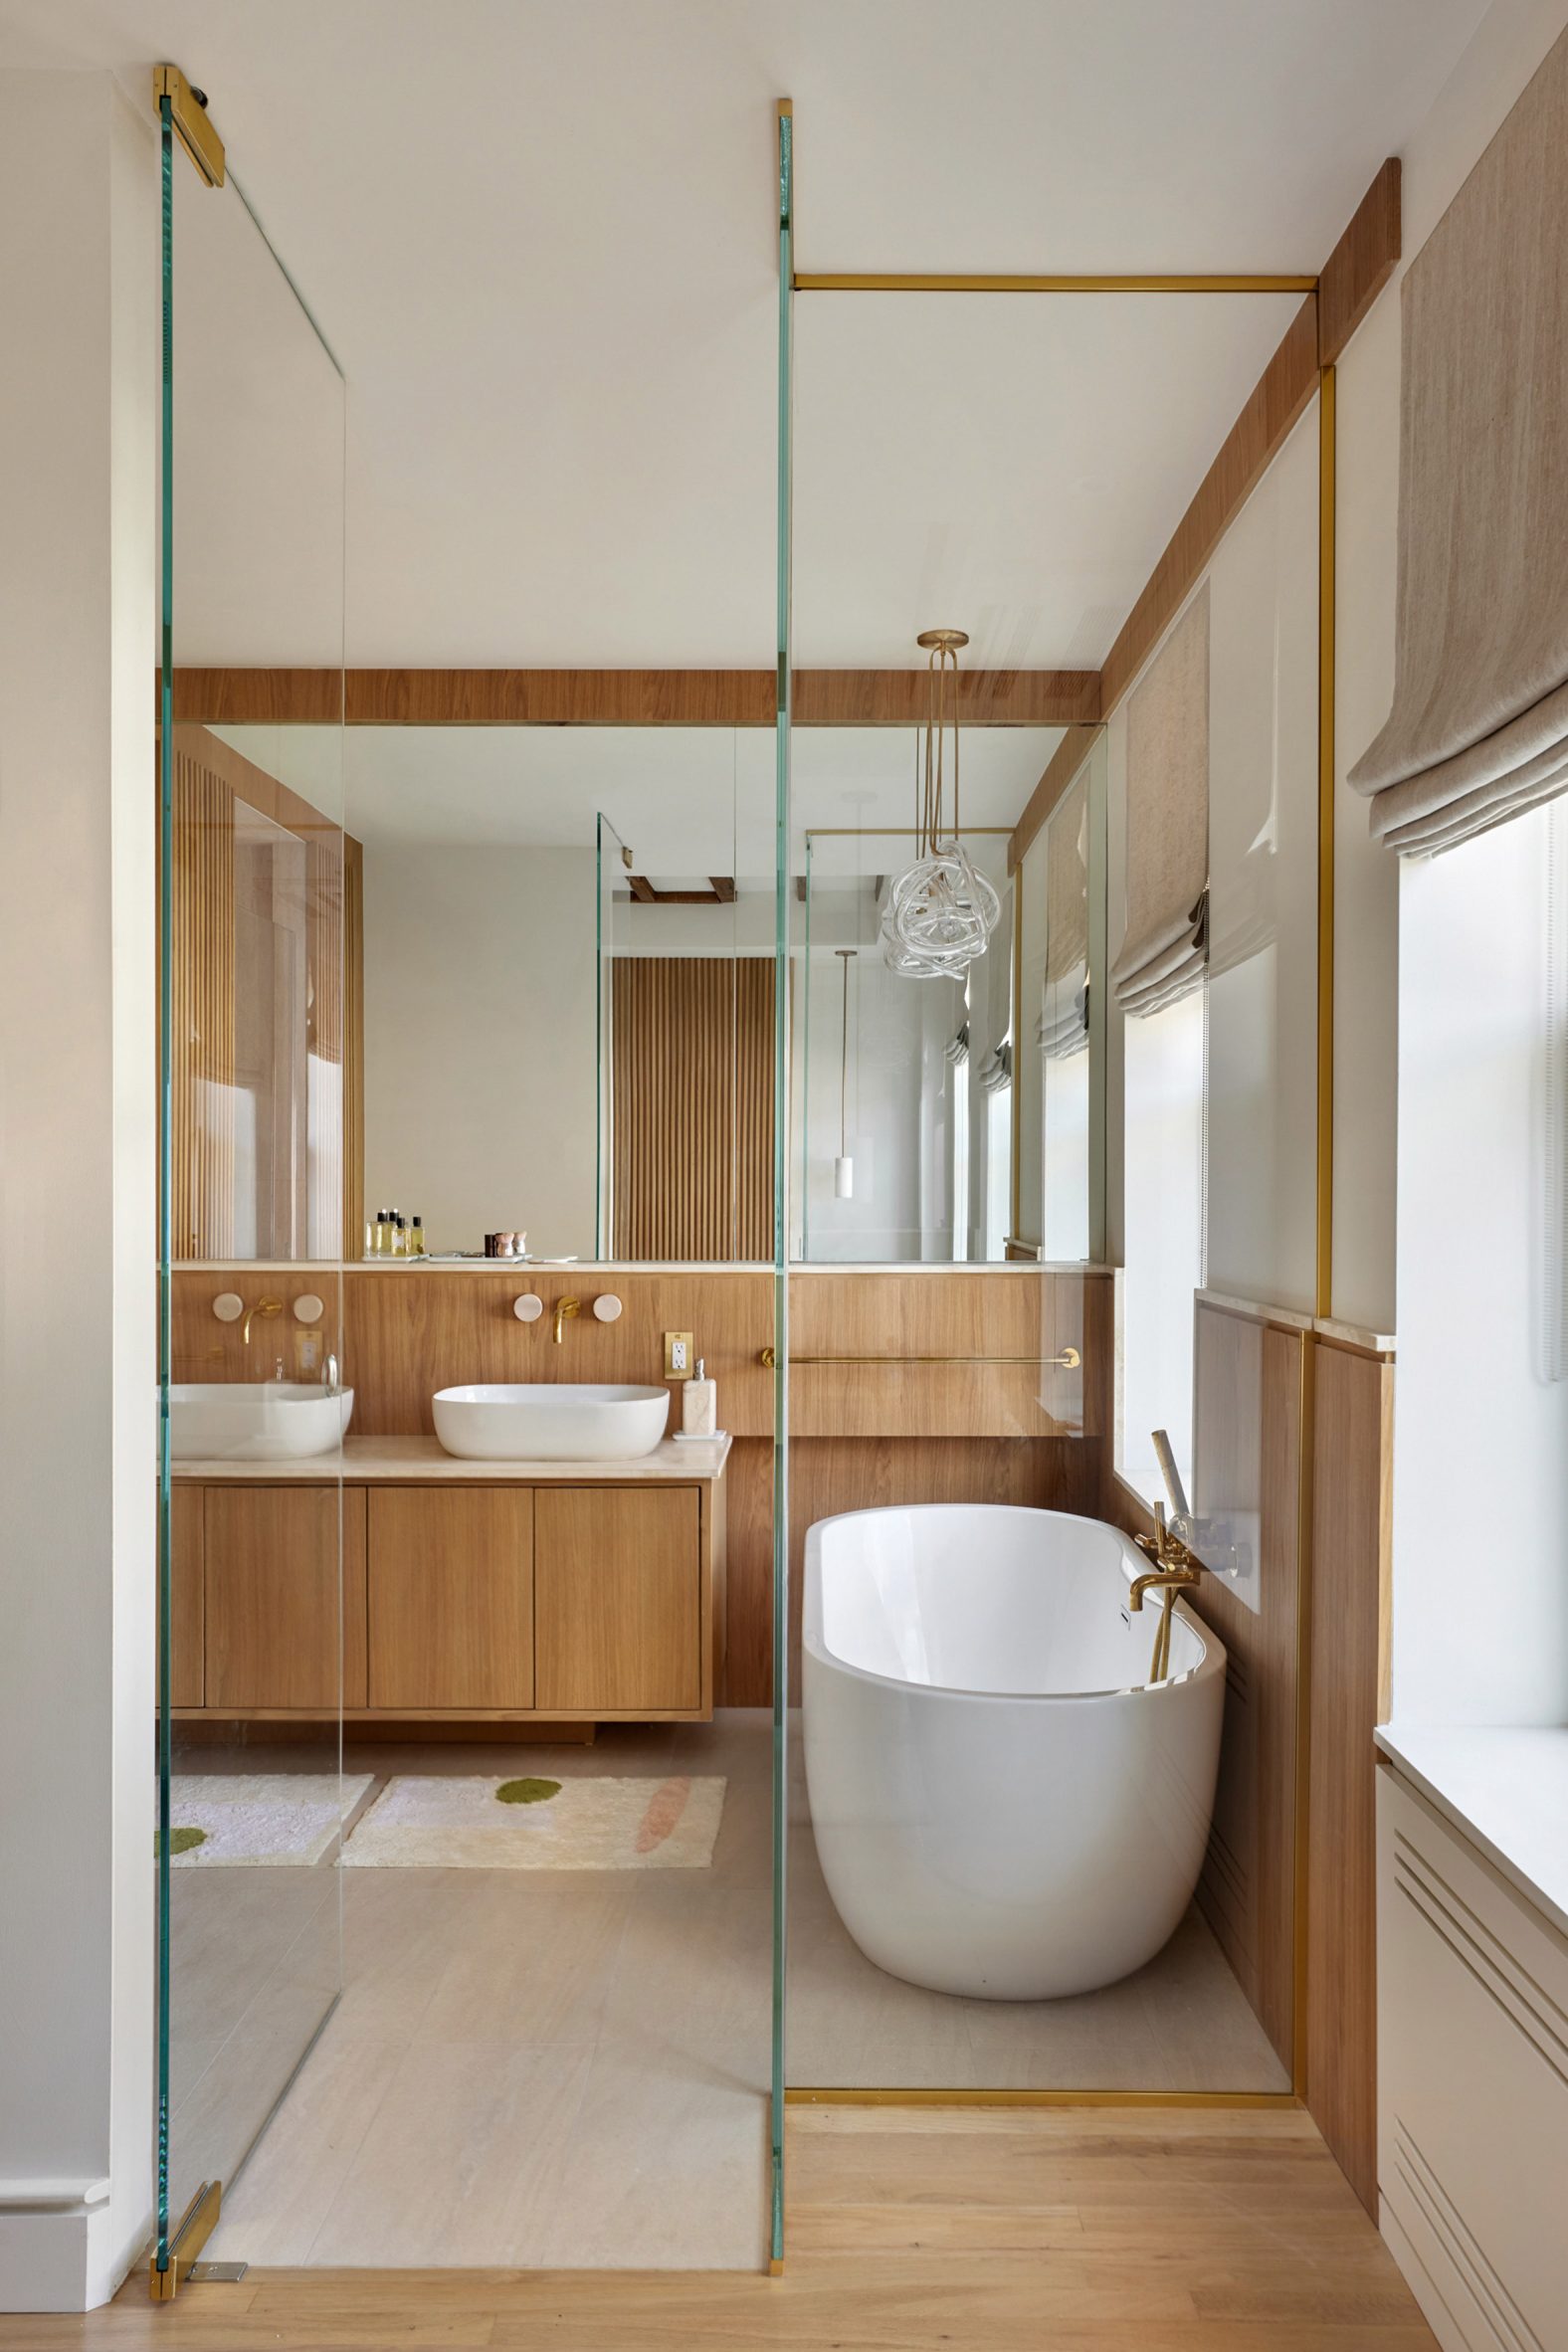 Bathroom behind glass partition